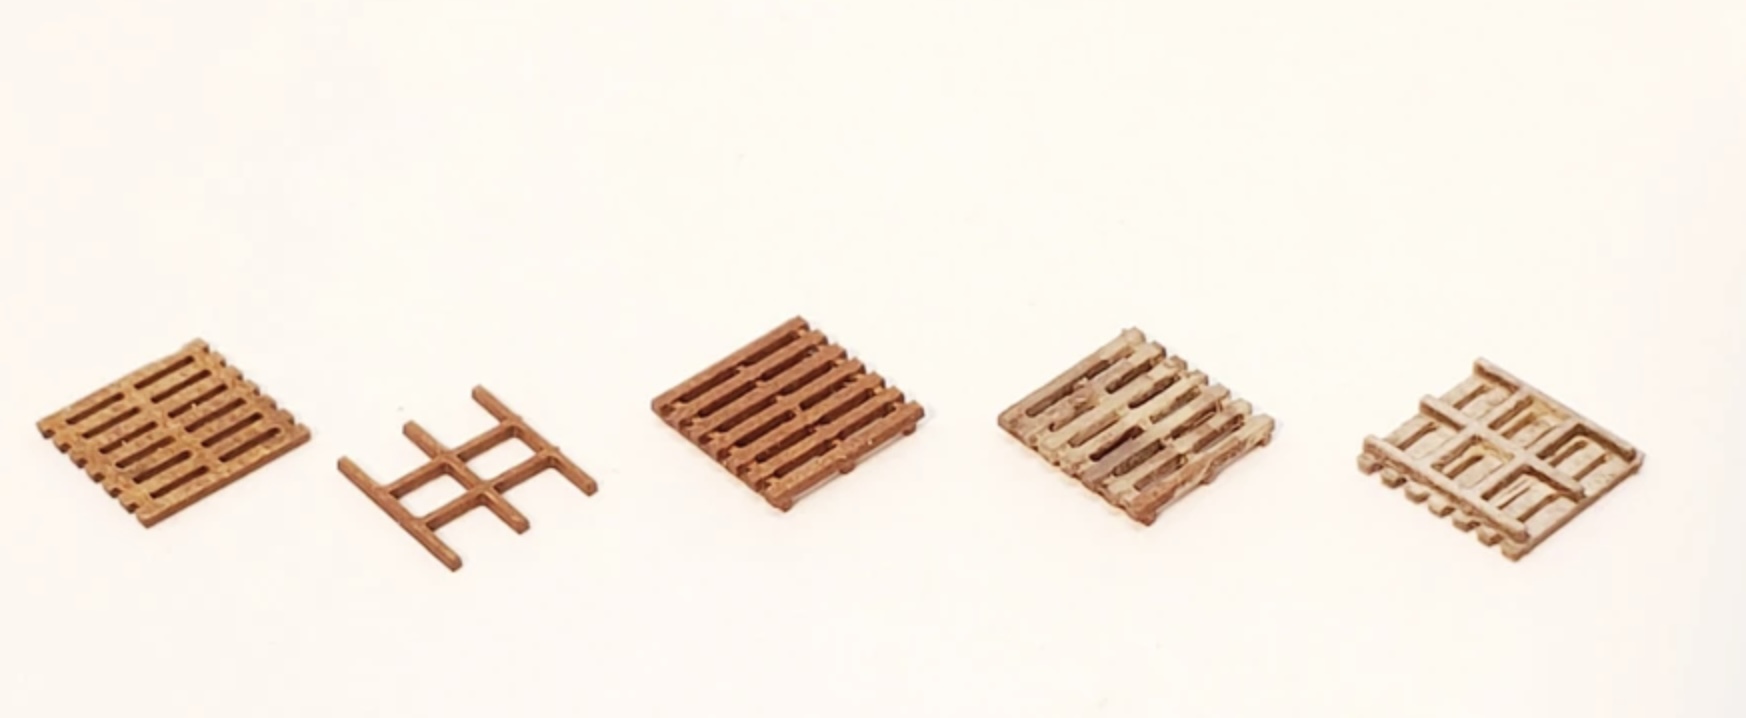 N Scale - ITLA - N-PALLET - Structure, Industrial, Pallets - Scenery - 20-Pack